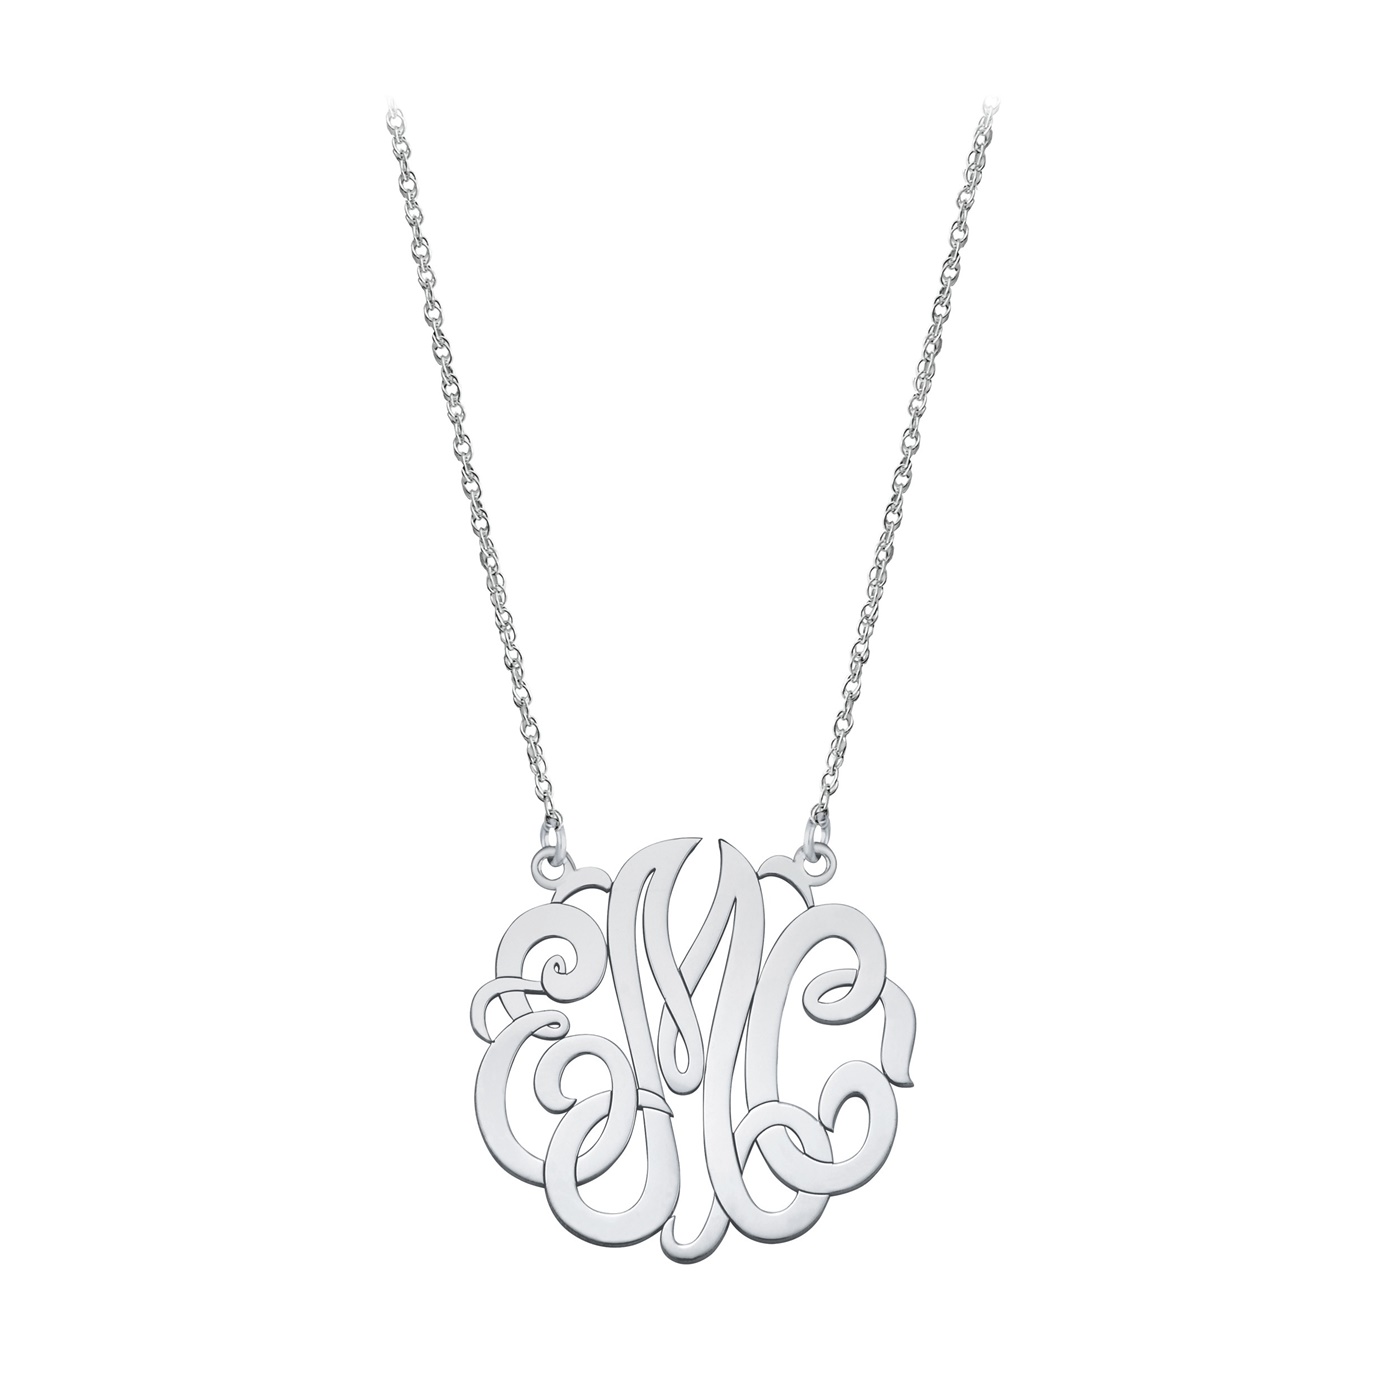 Small 1.5 Inches Wide Vine Monogram Necklace 18 Inch Silver Plated Chain 